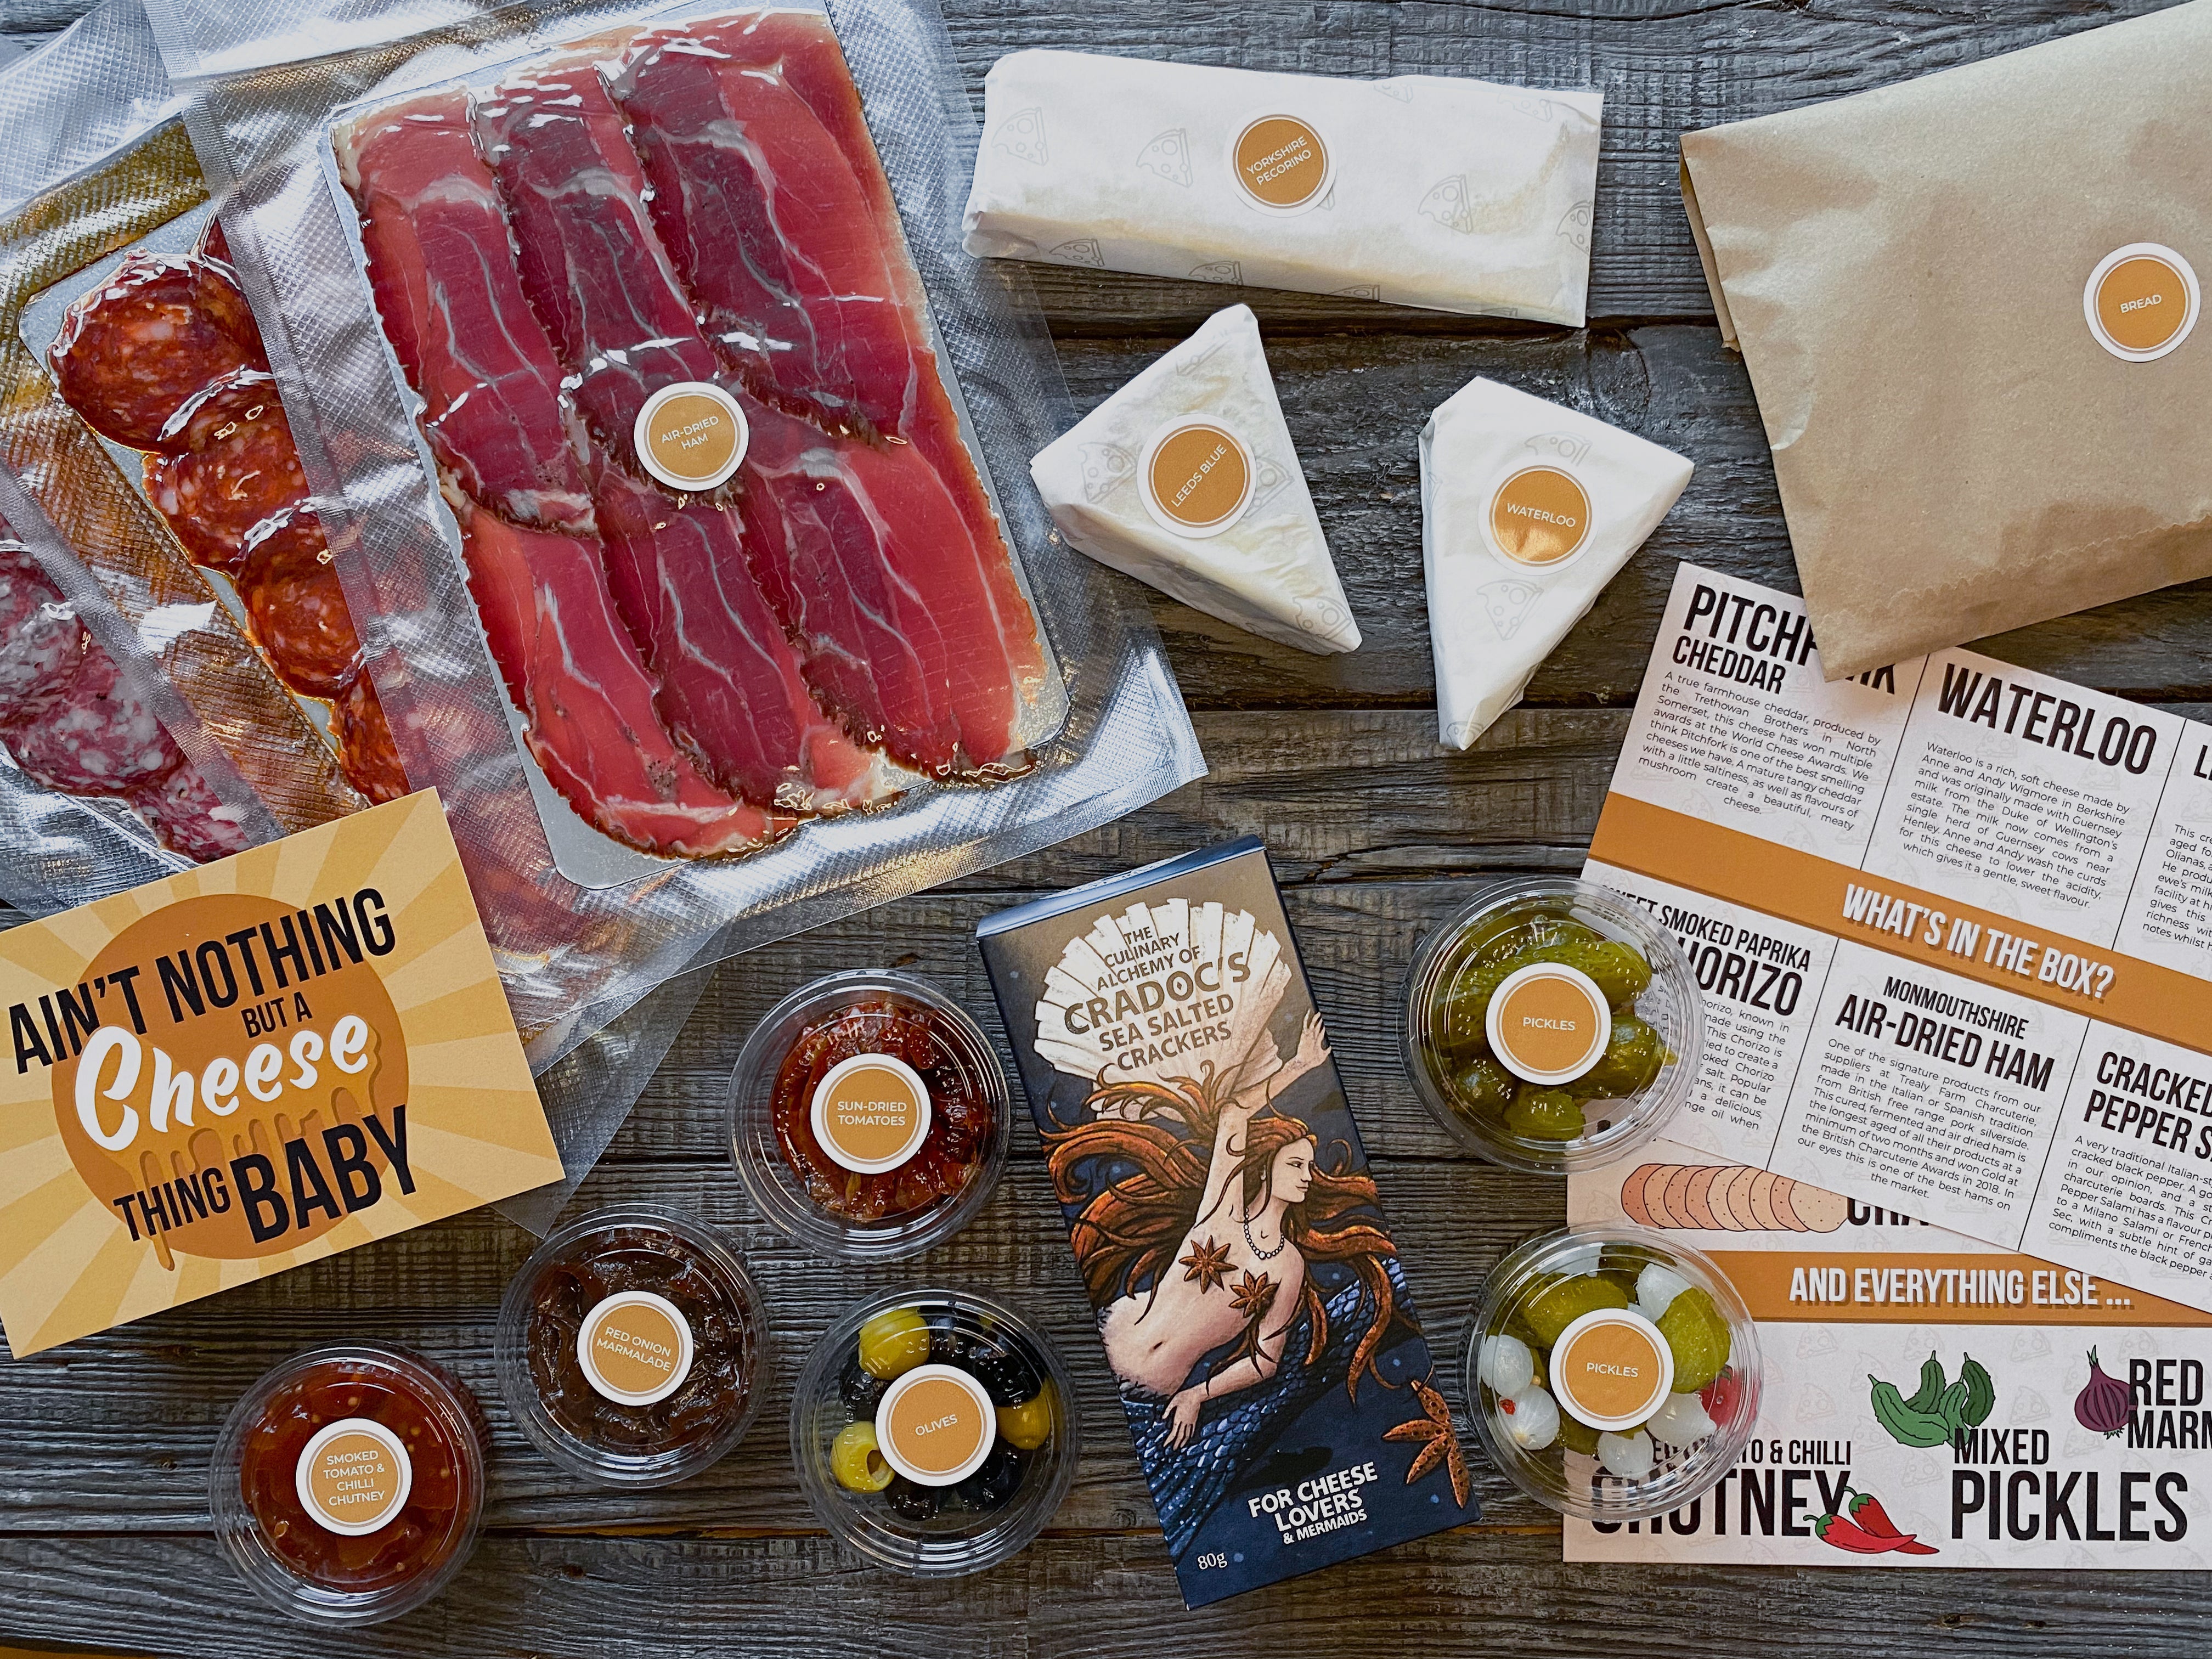 Three types of sliced cured meats vacuum sealed individually and three individually wrapped portions of cheese. A packet of crackers, and individual portion pots of olives, sun dried tomatoes, red onion marmalade, smoked tomato and chilli chutney, and two variations of pickles, all on a wooden background. There's an A5 descriptive 'What's in the box' card visible, which describes the produce in more detail and an A6 graphic postcard with the words 'Ain't nothing but a cheese thing baby'.